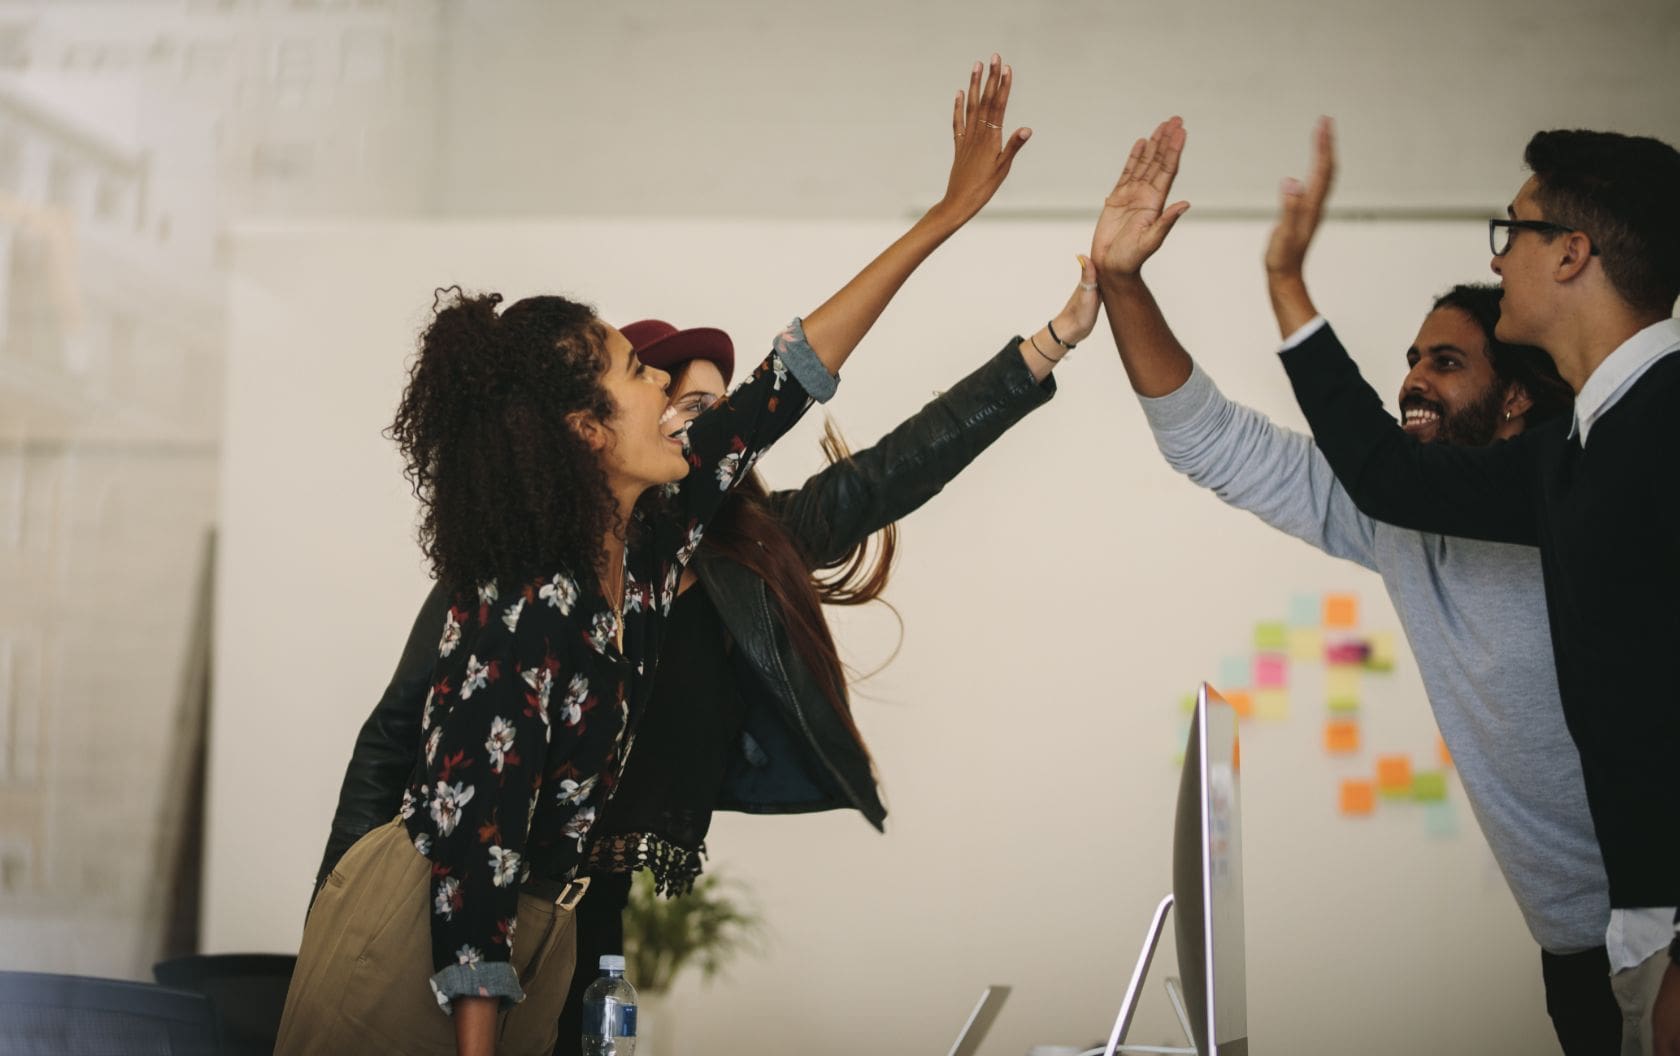 Two woman and two men in a business's marketing team high-fiving over the desk as they find that their inbound marketing strategy is creating efficient business growth.